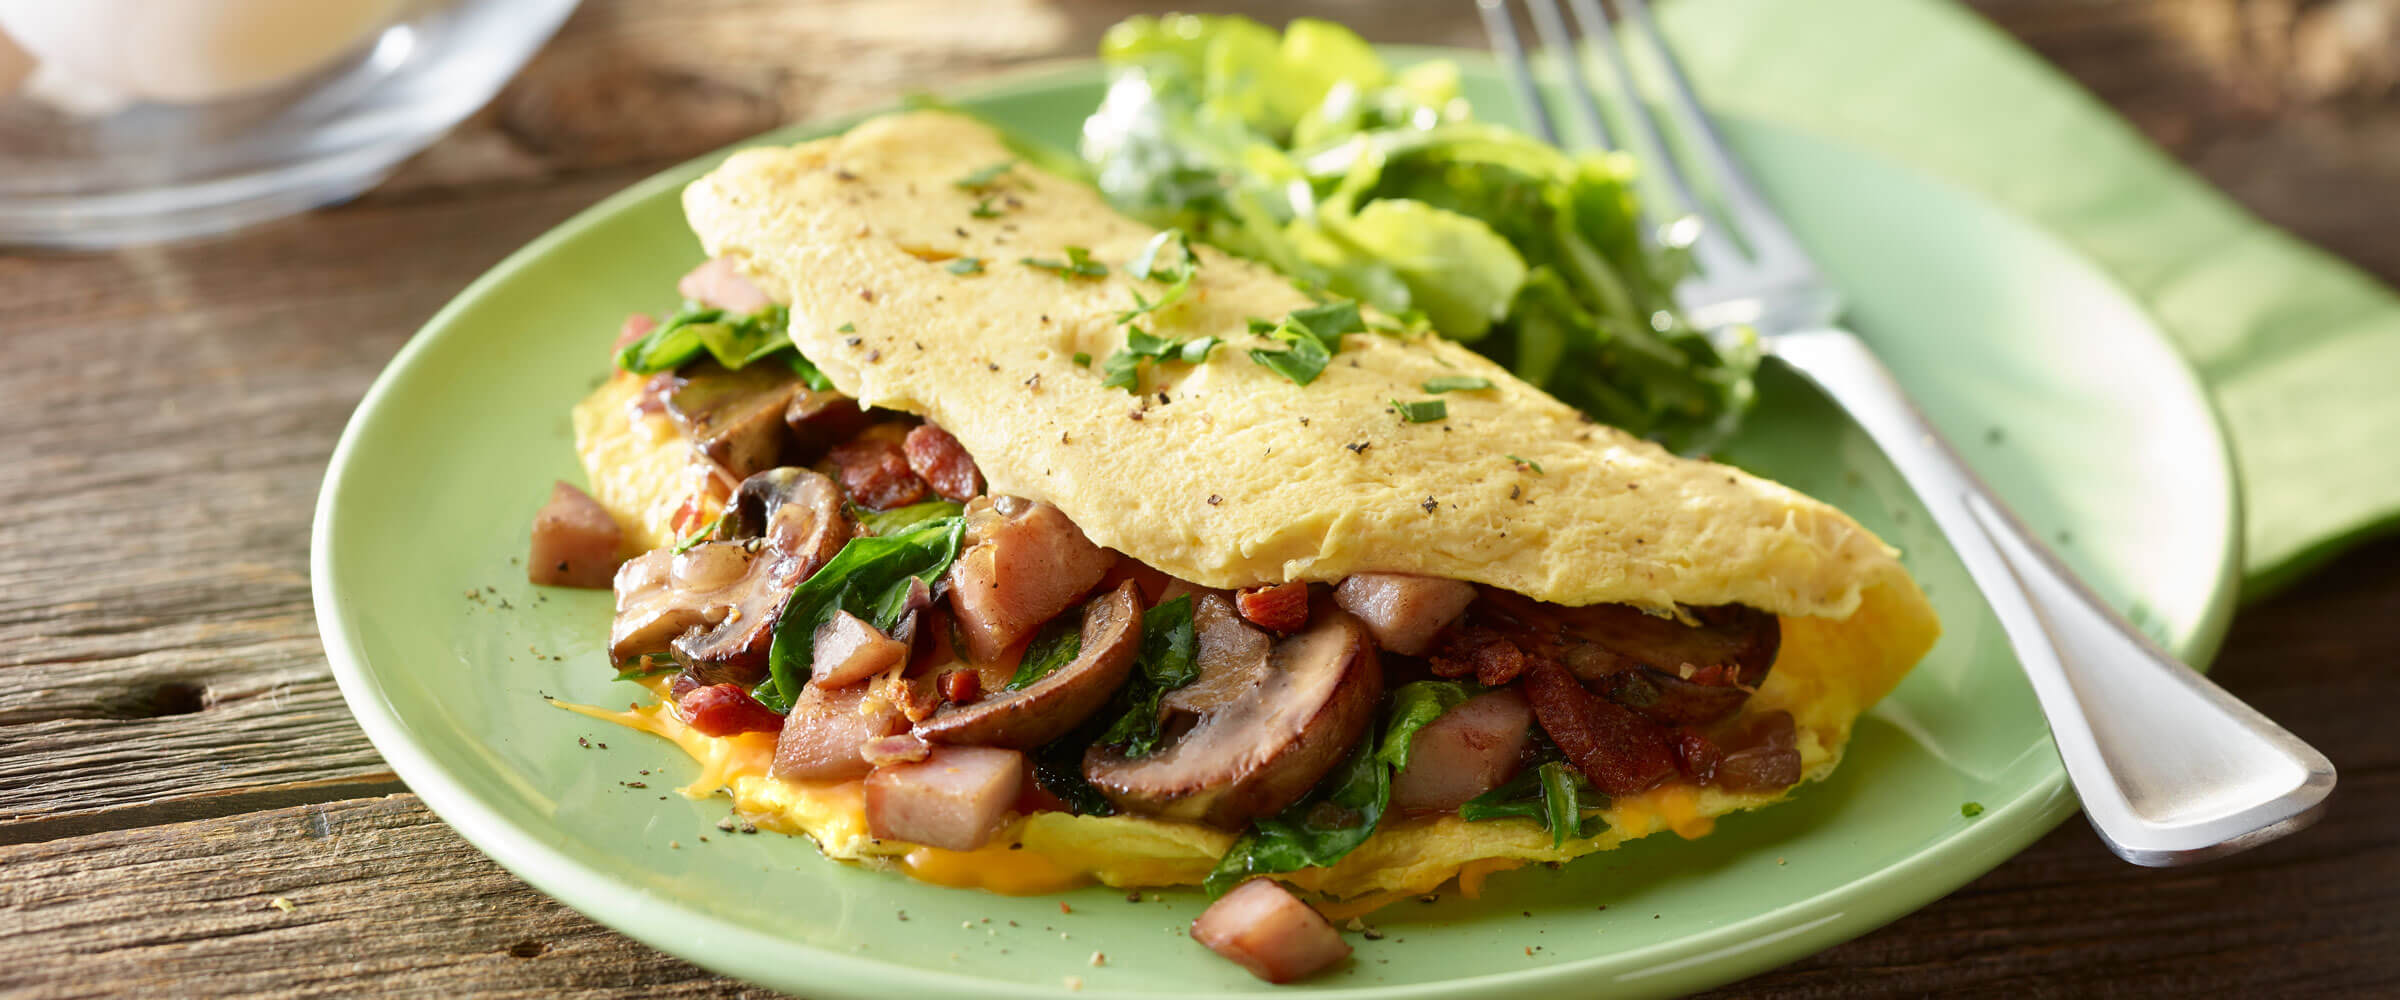 Bacon, Ham and Cheese Omelet with mushrooms on green plate